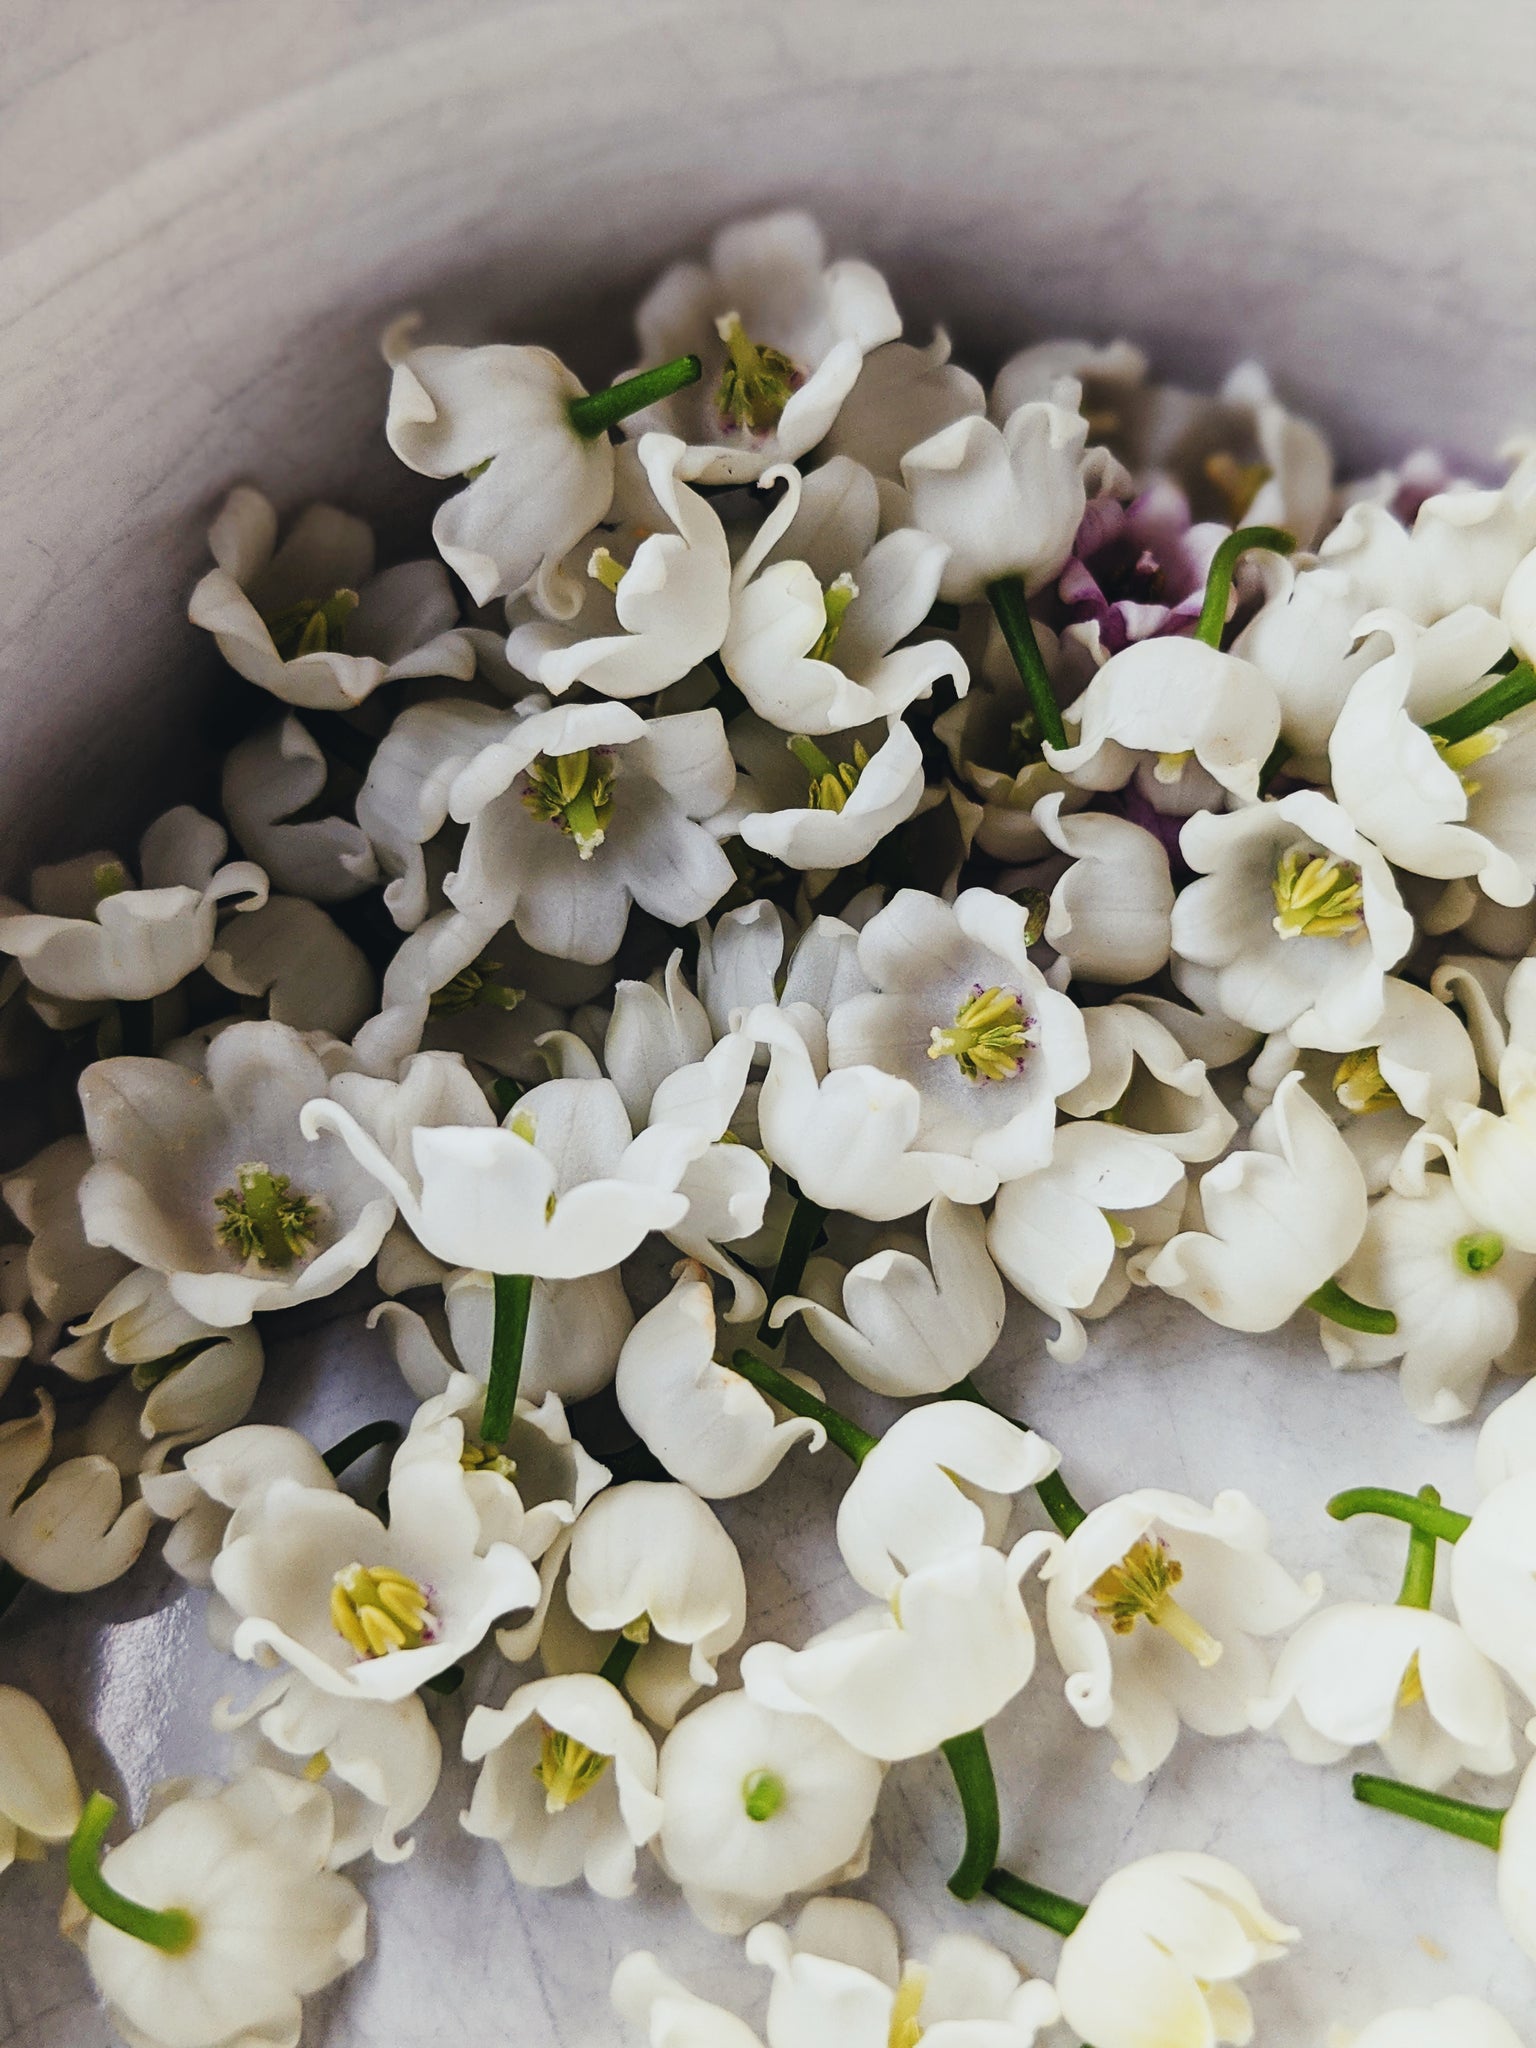 The Poisoned Garden: Lily of the Valley – The Death Scent Project